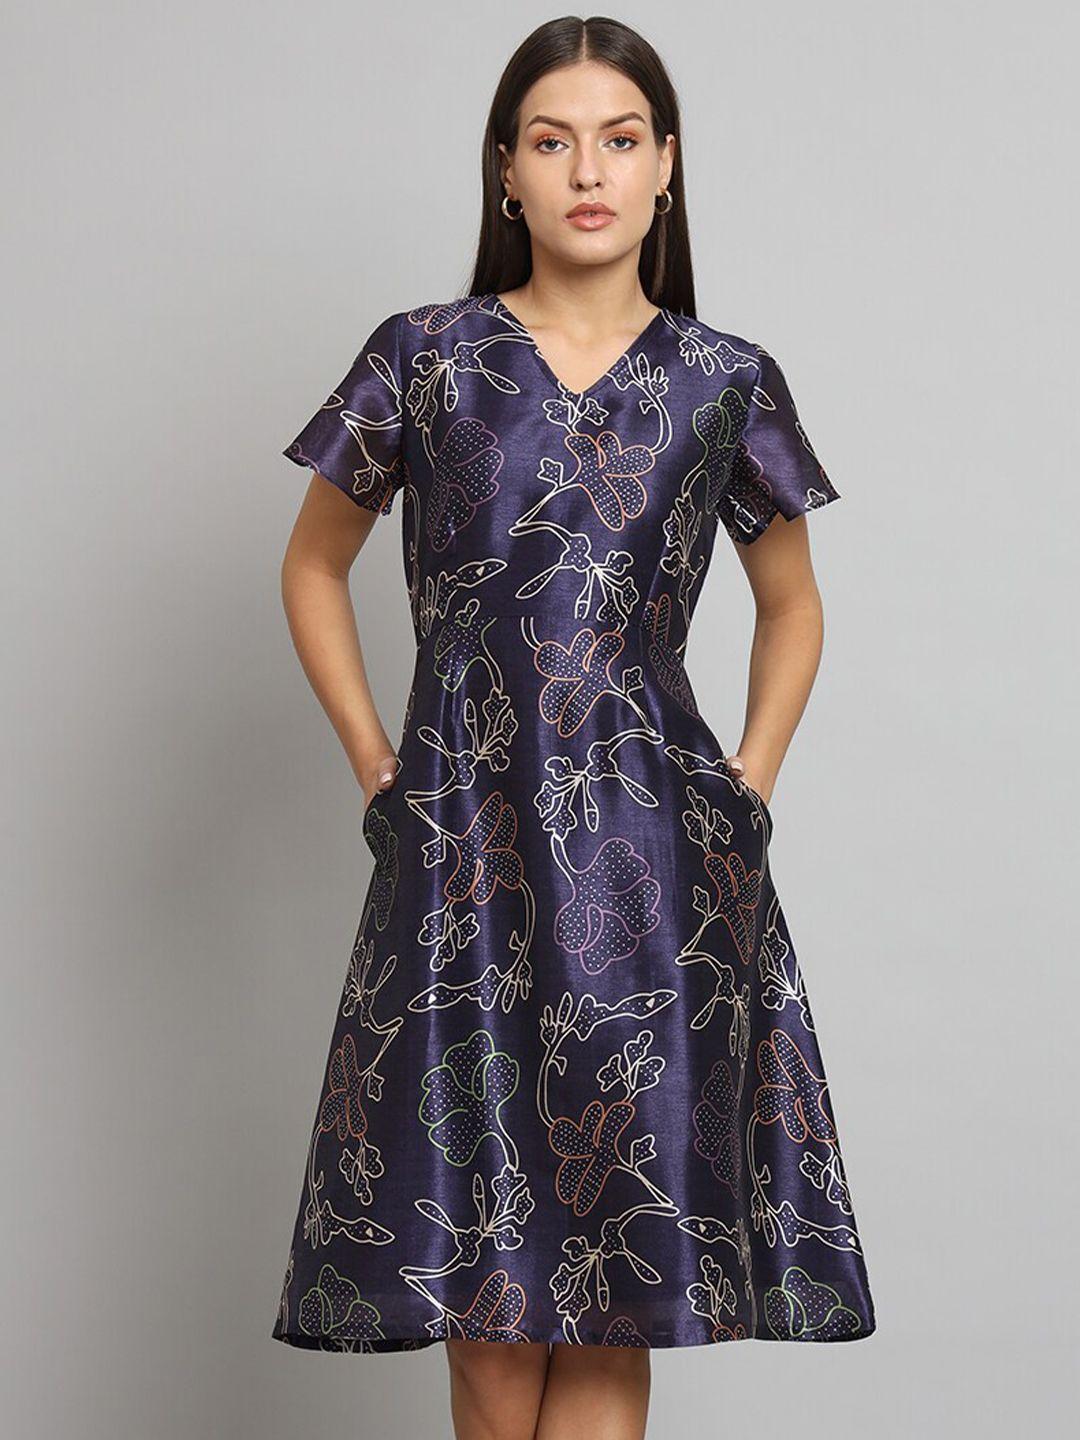 powersutra floral printed silk fit & flare dress